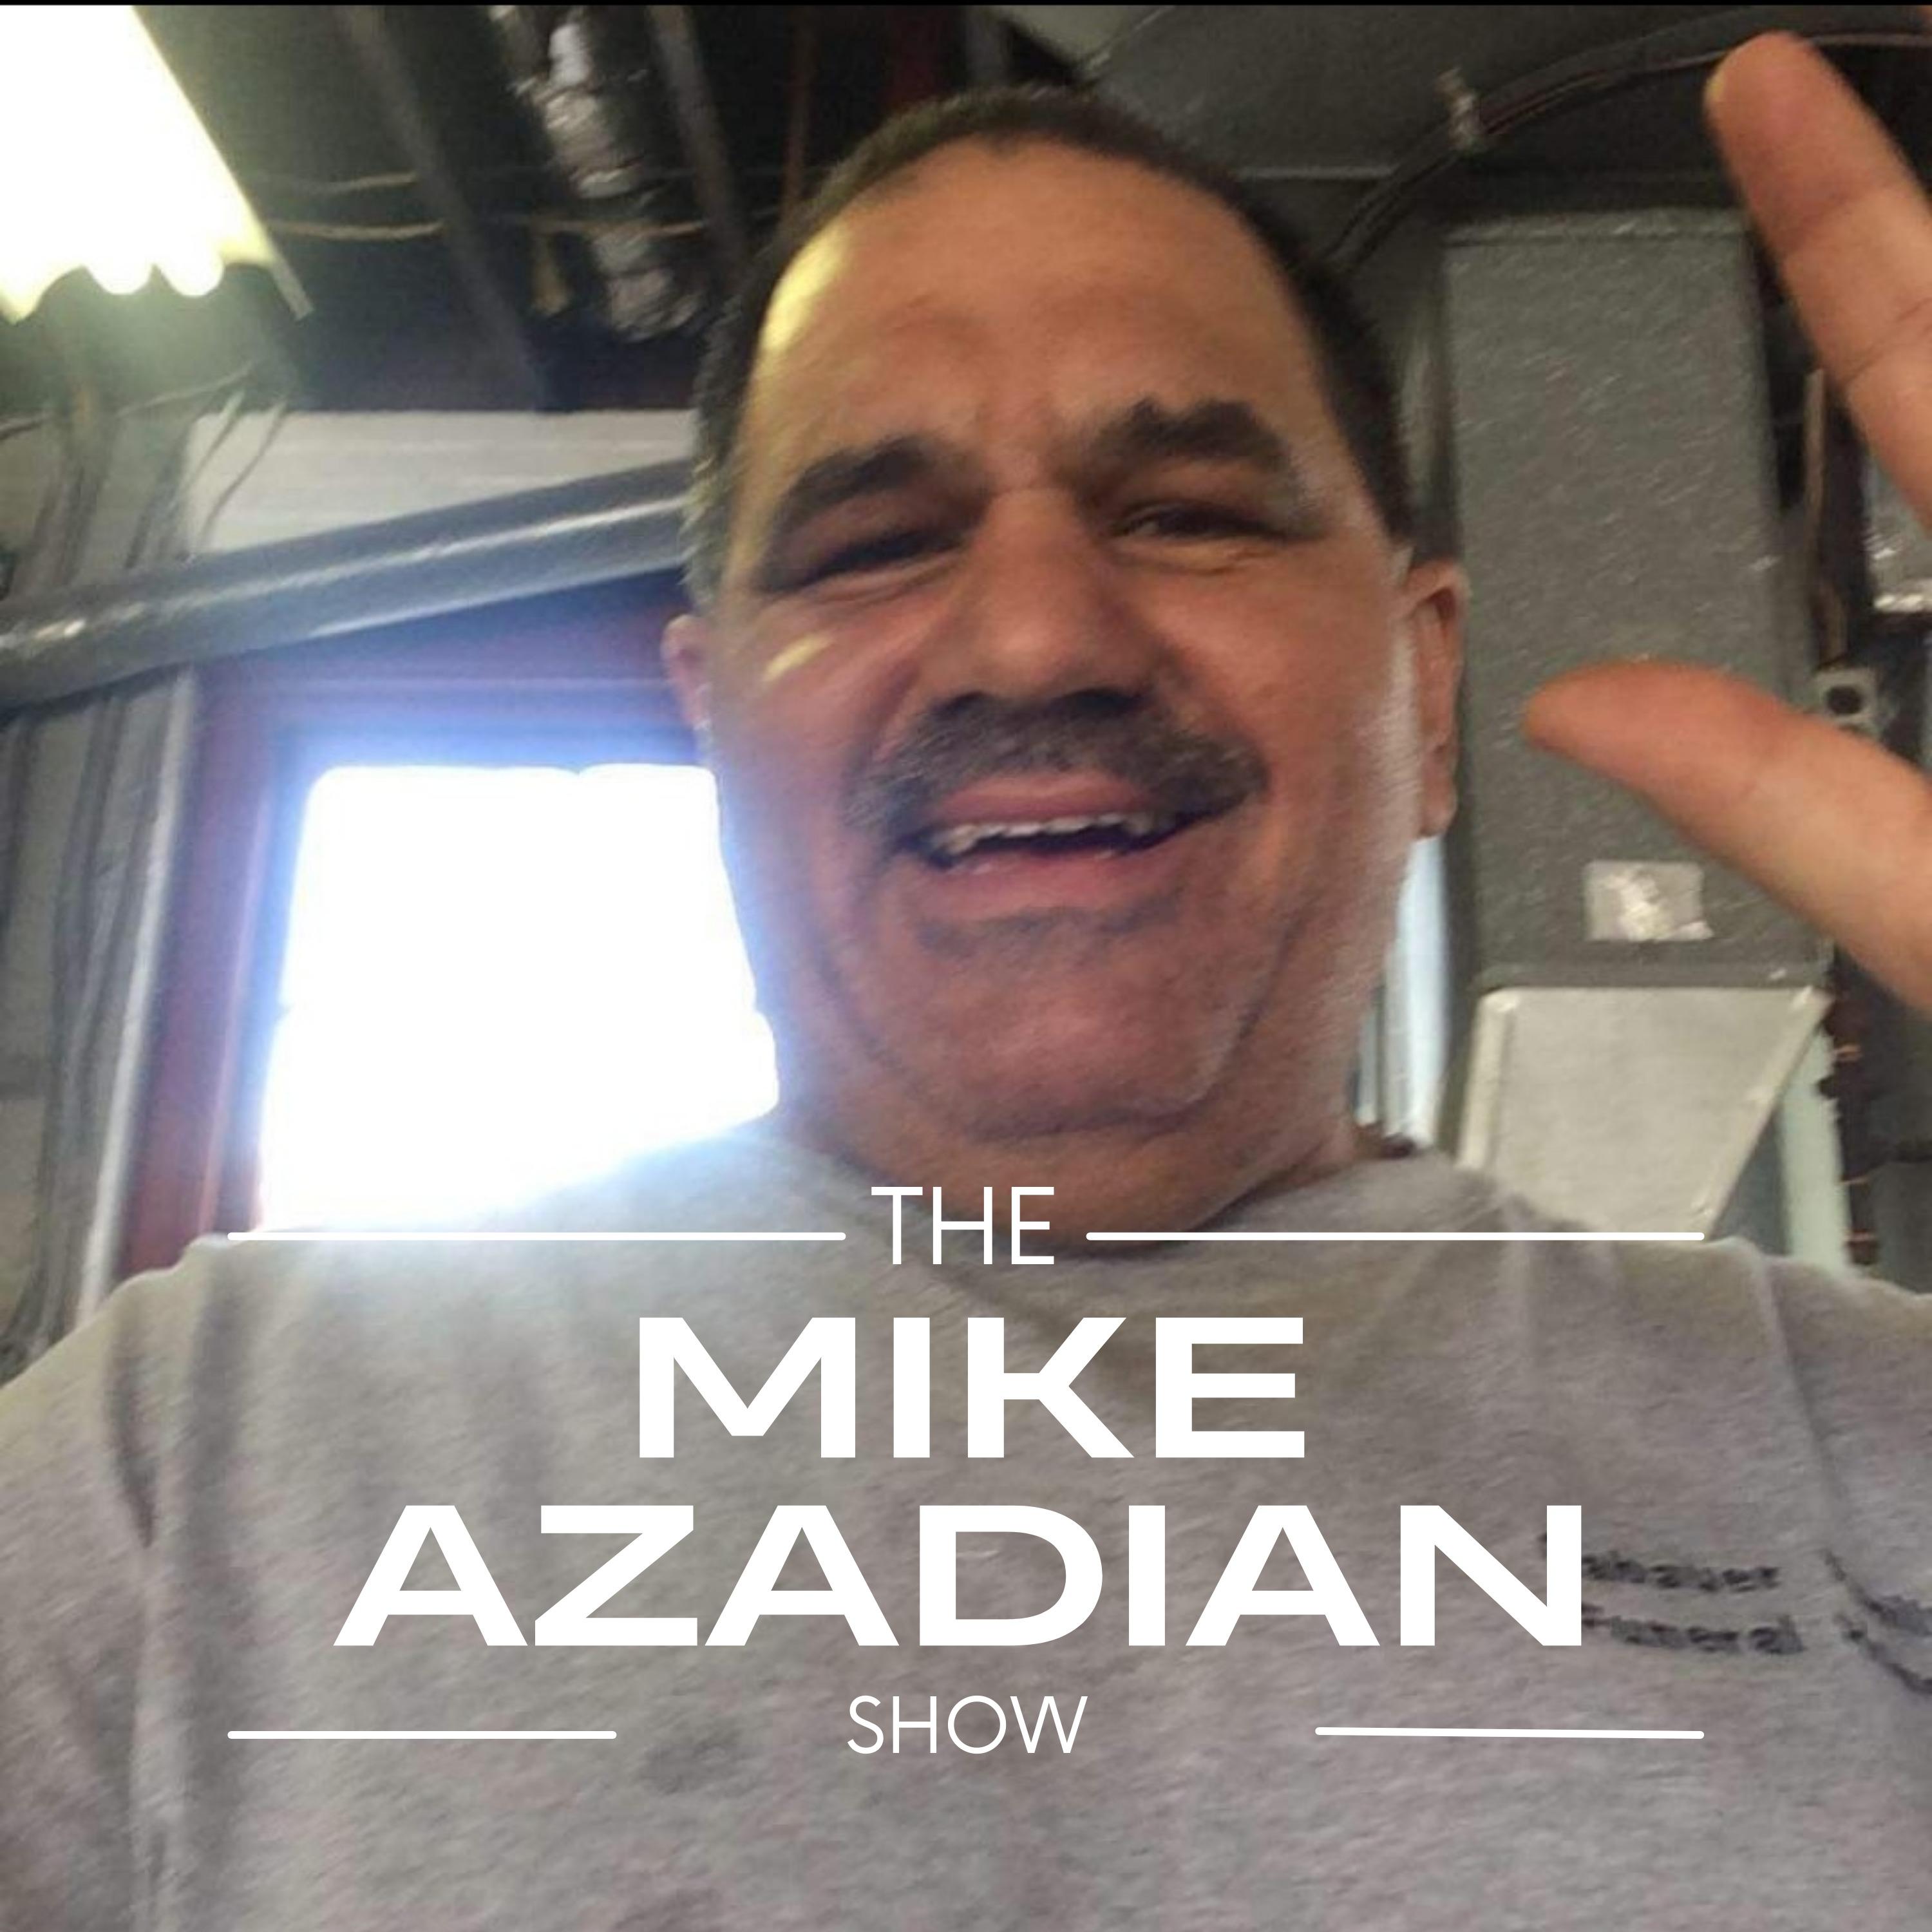 THE MIKE AZADIAN SHOW